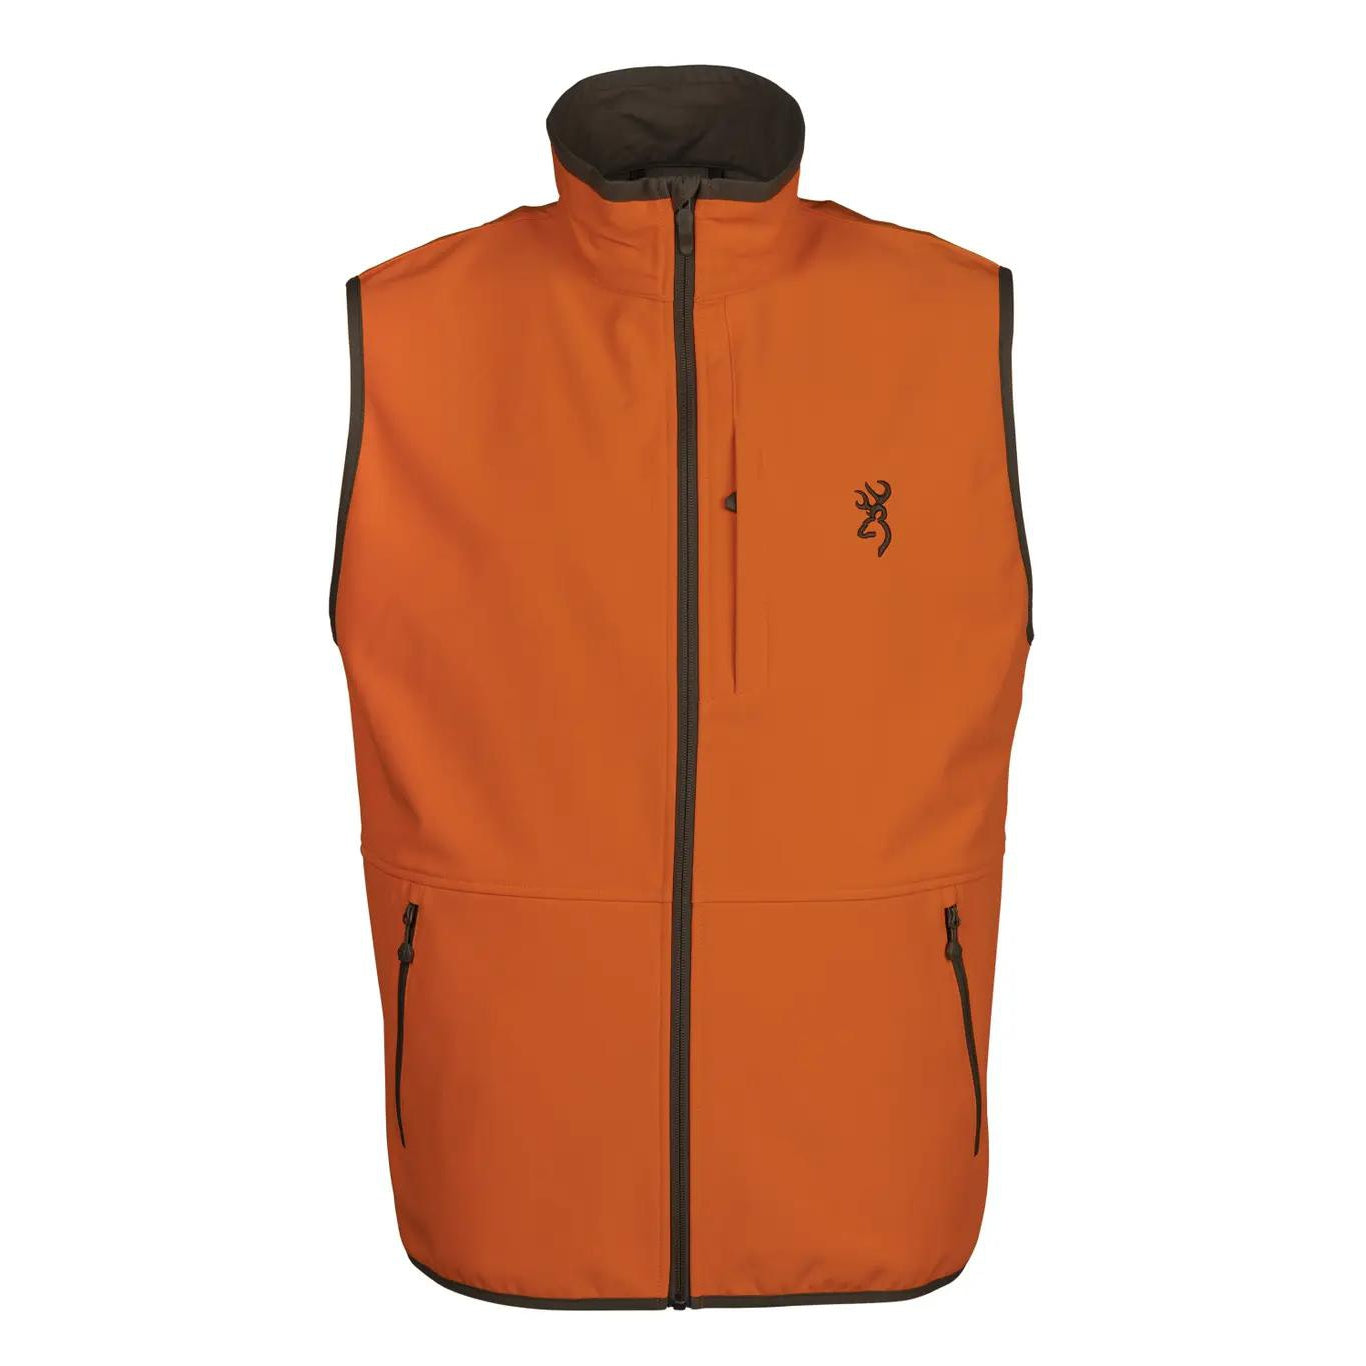 Browning Opening Day Soft Shell Vest-Hunting/Outdoors-Blaze-M-Kevin's Fine Outdoor Gear & Apparel